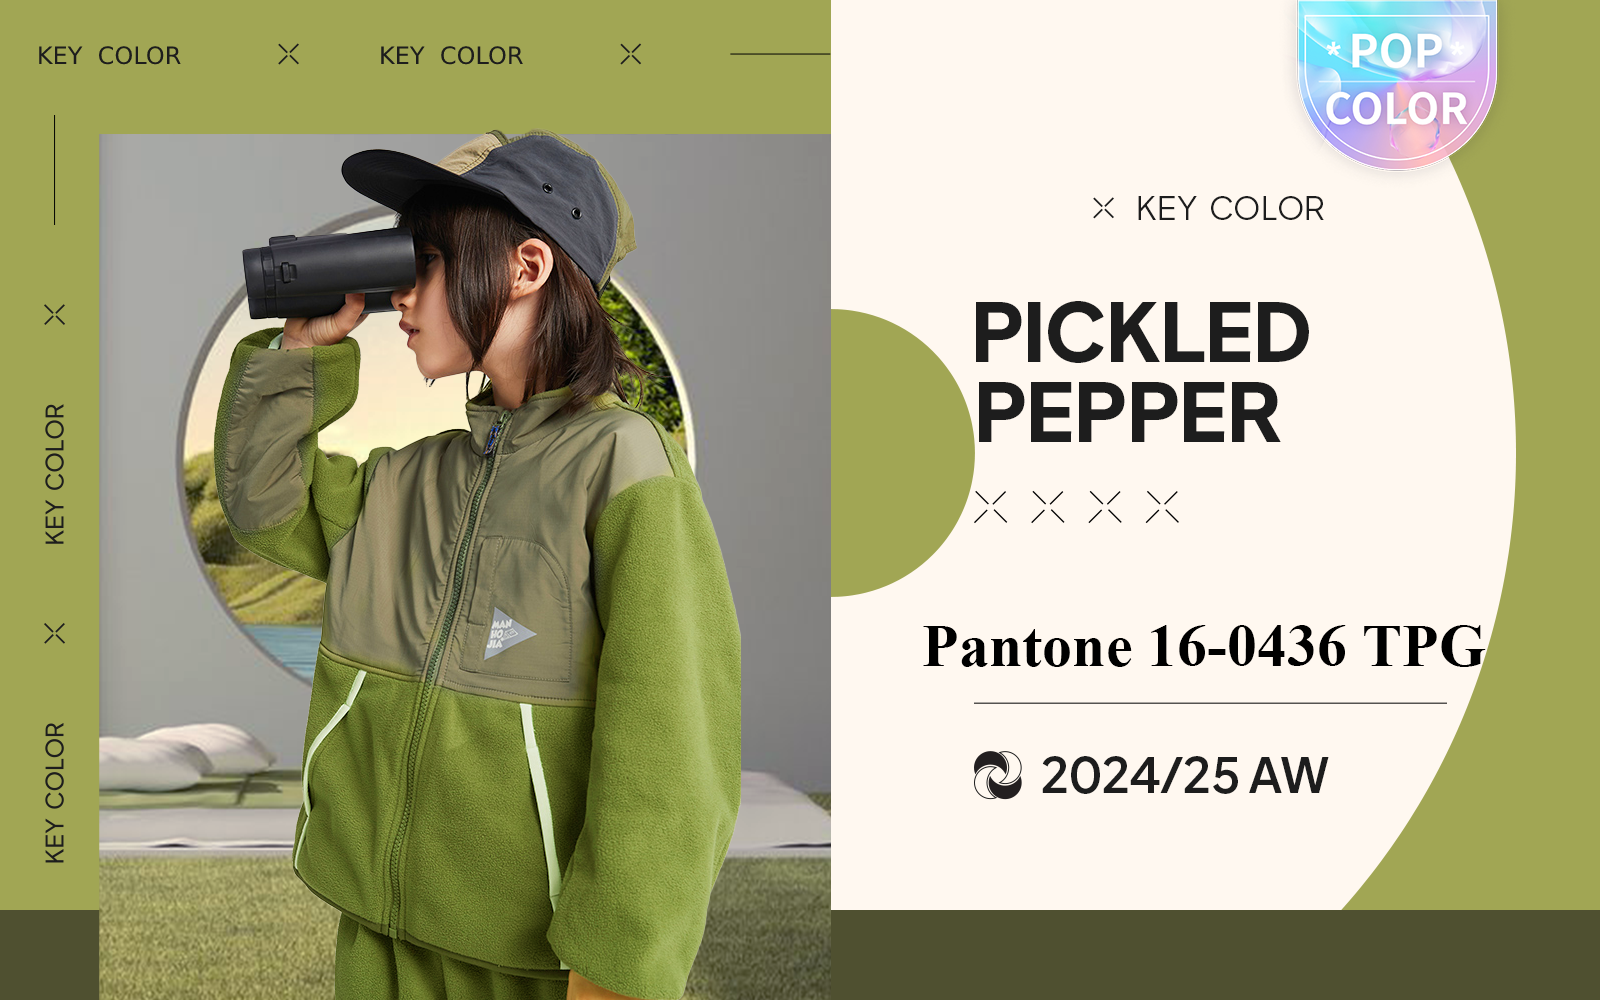 Pickled Pepper -- The Color Trend for Boyswear